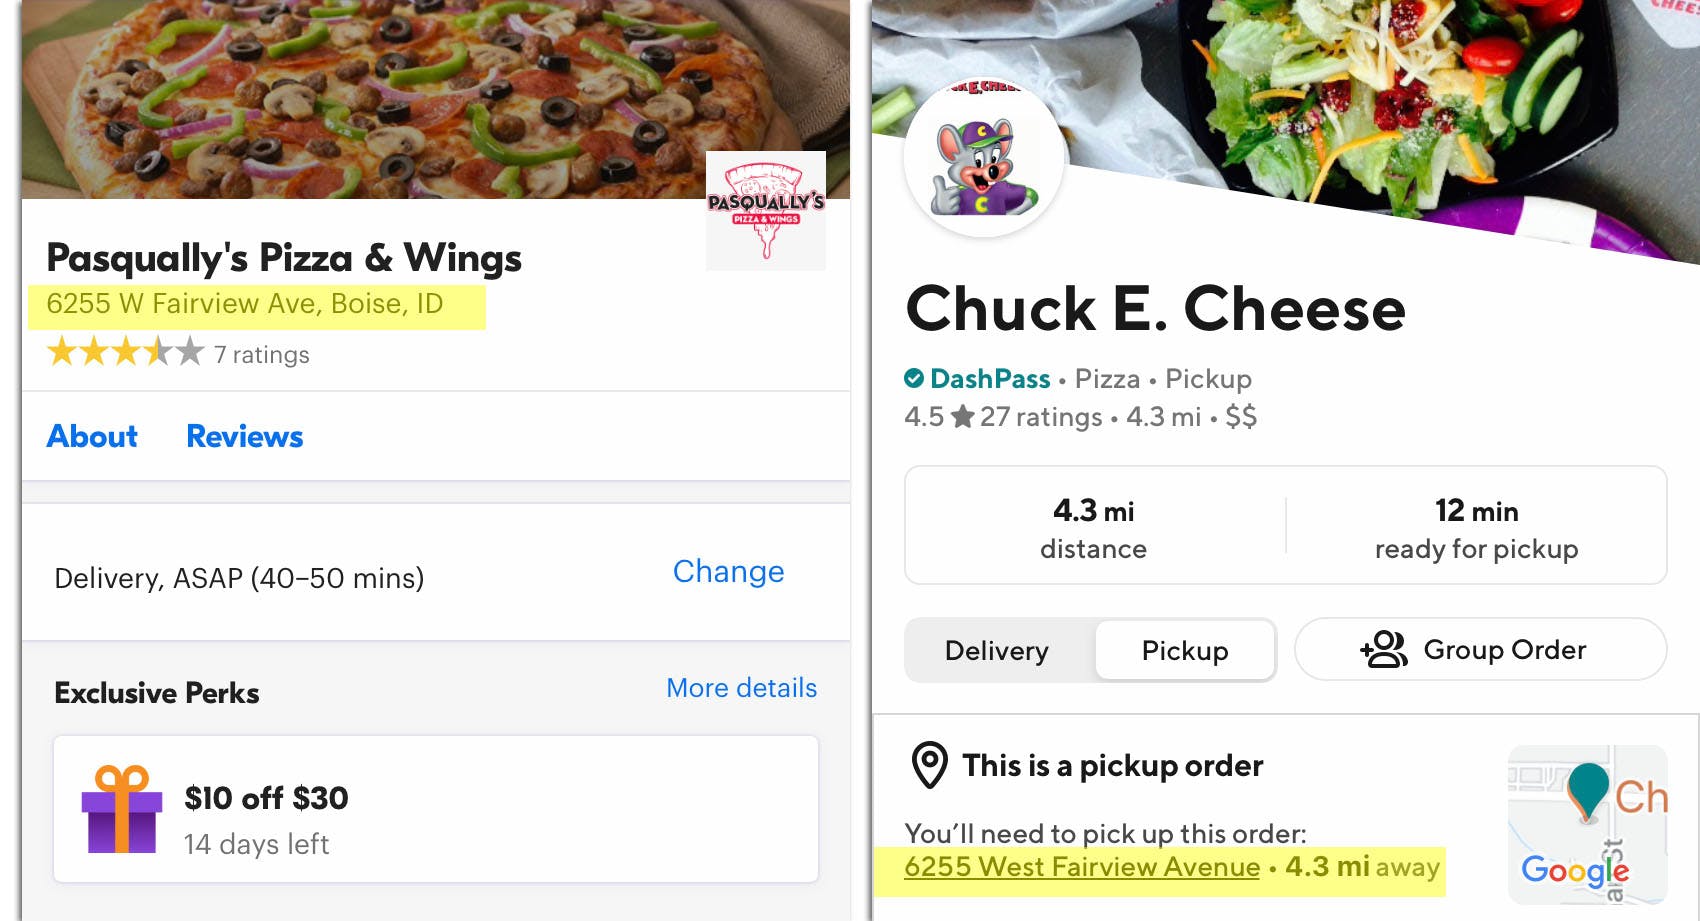 Chuck E. Cheese changed their name to Pasqually's on GrubHub. It's still the old name on DoorDash.